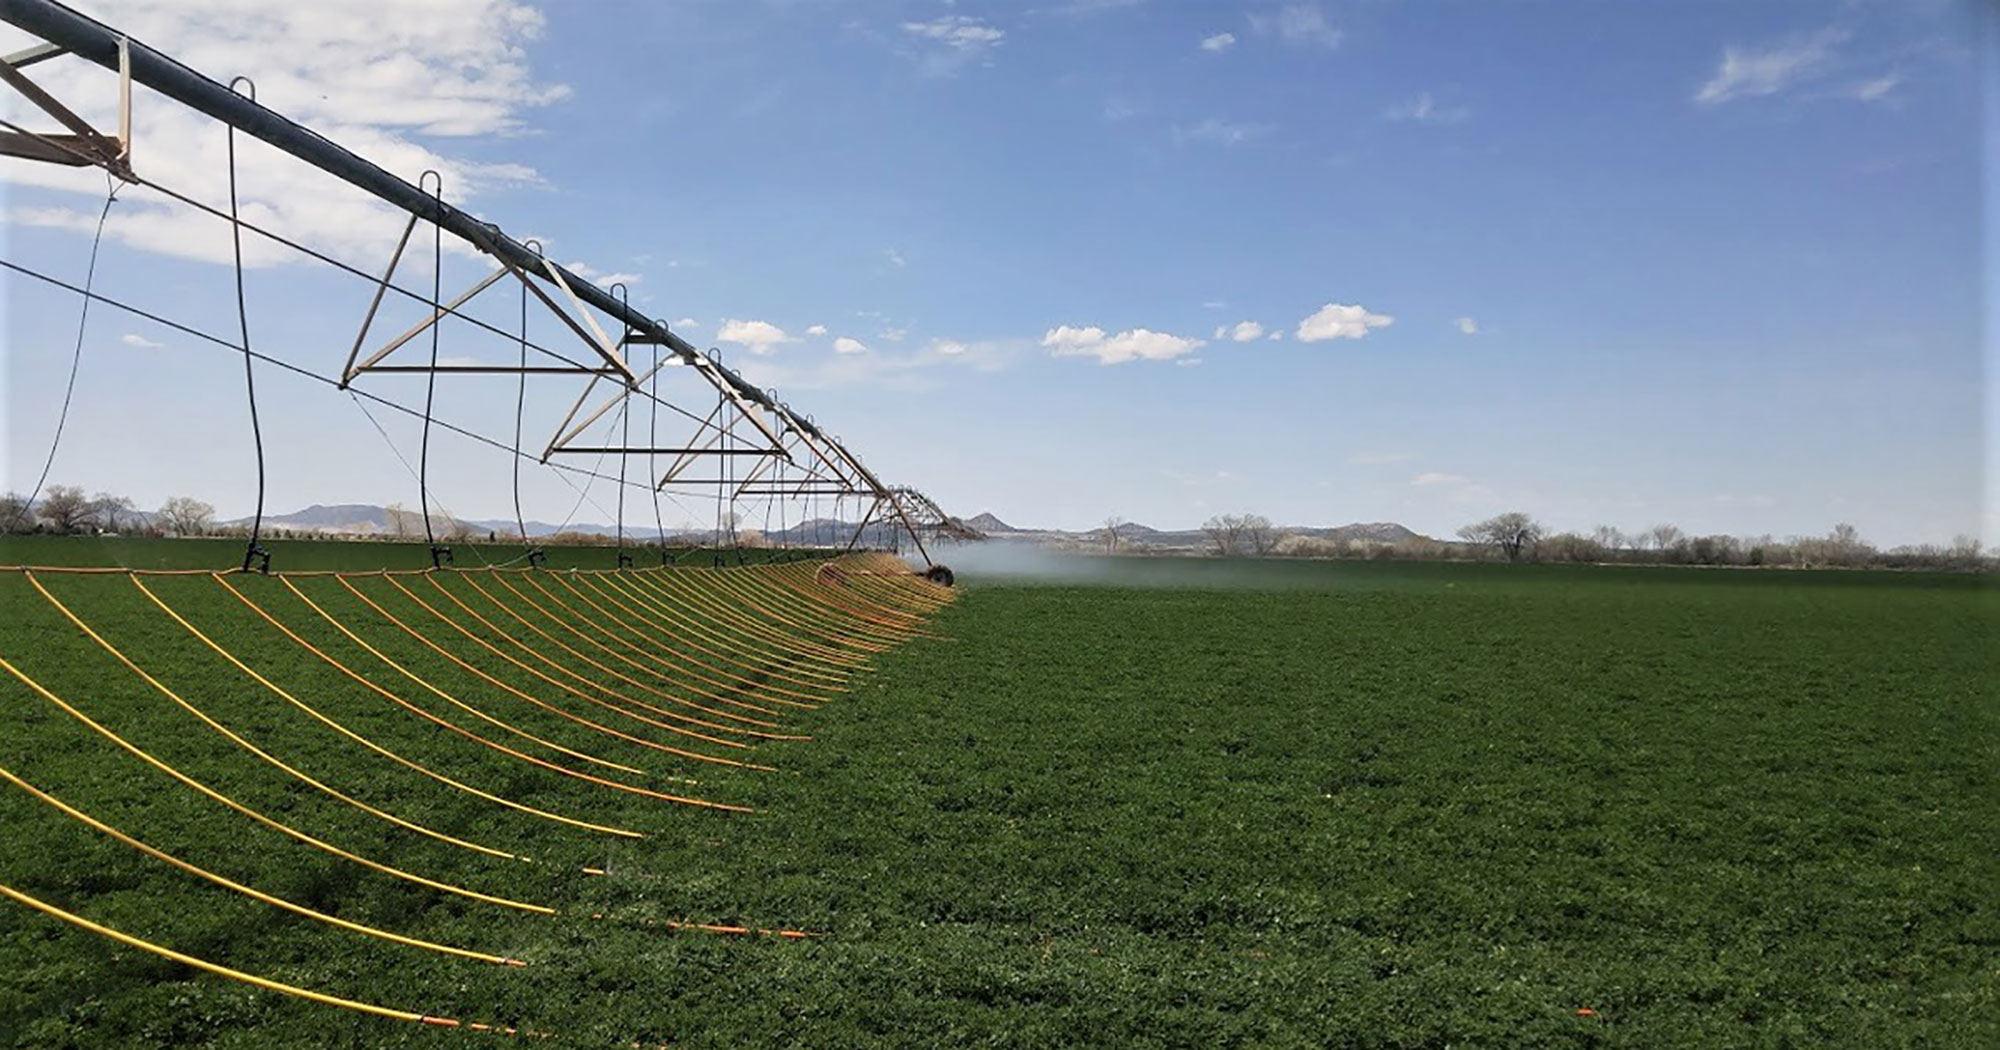 Water management can help grow farm profits - AGDAILY